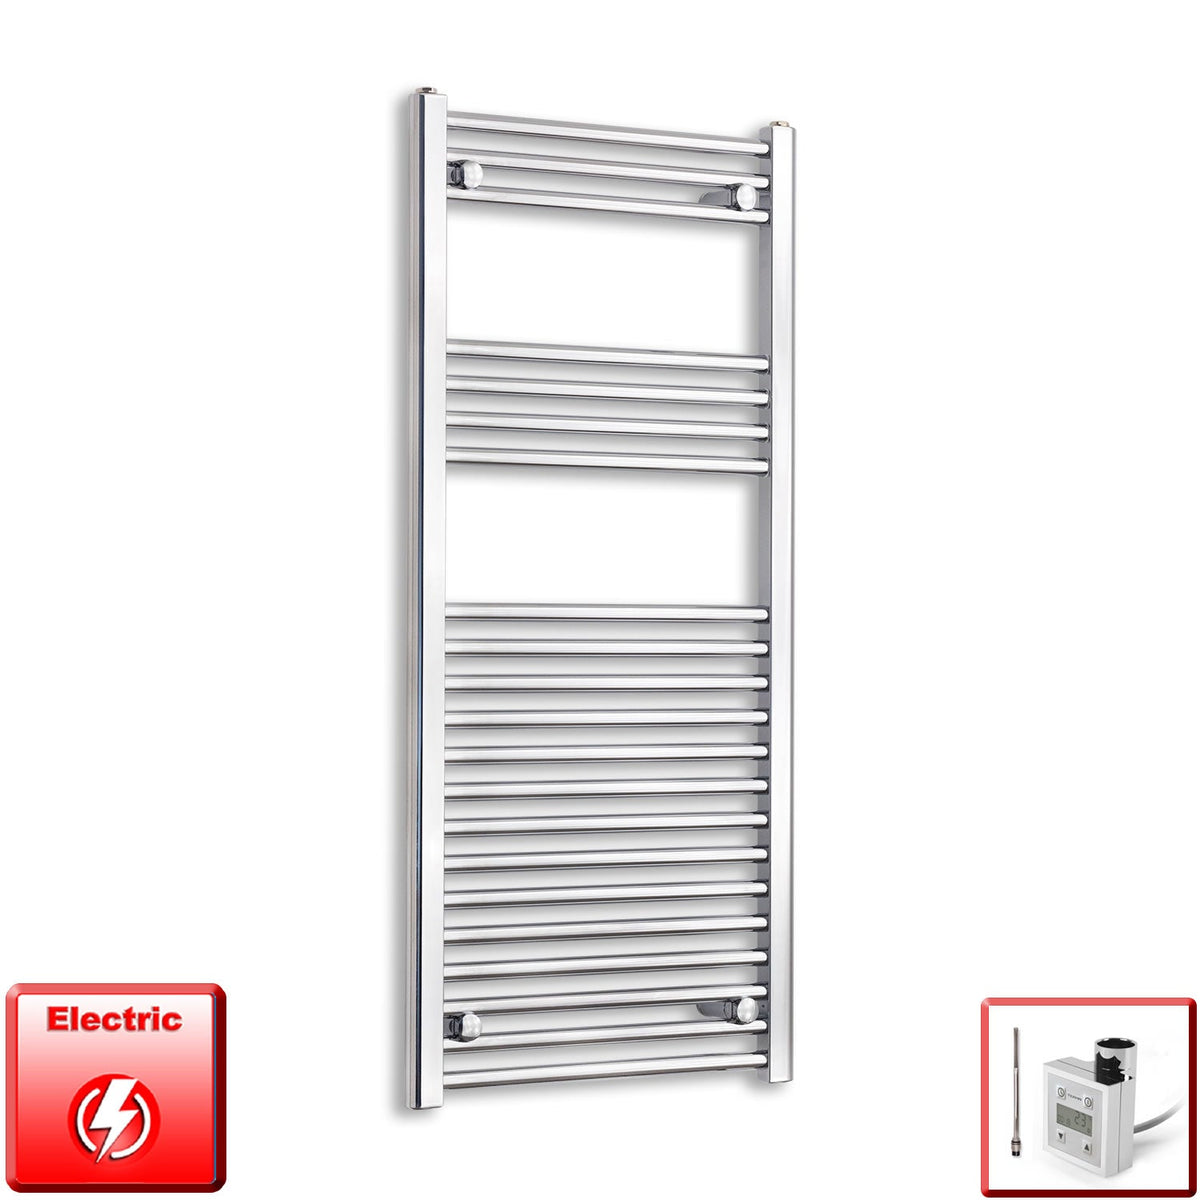 600mm Wide 1100mm High Pre-Filled Chrome Electric Towel Rail Radiator With Thermostatic KTX3 Element